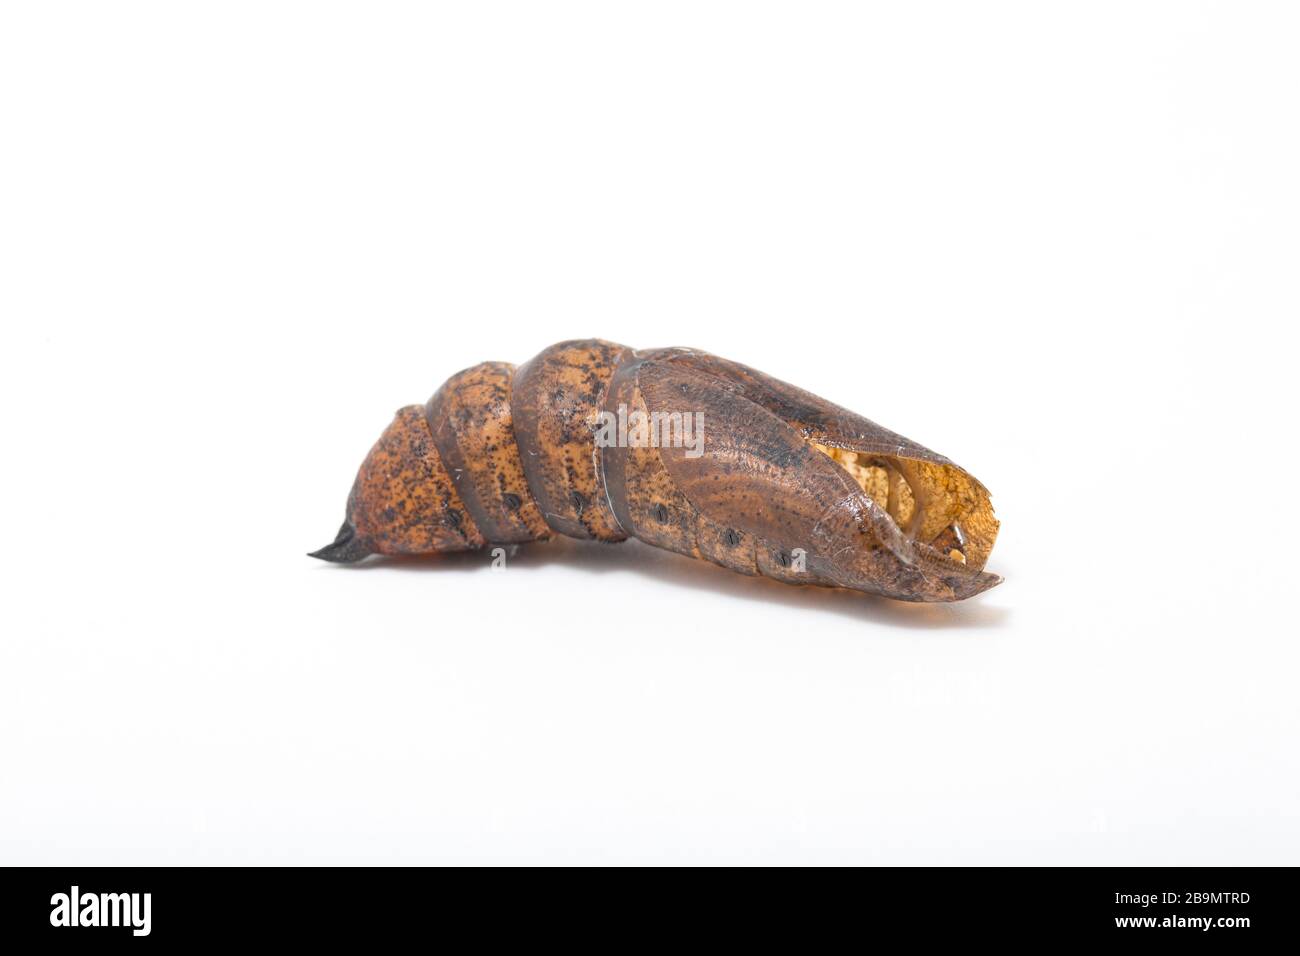 The empty chrysalis, or pupa, of an elephant hawk moth, Deilephila elpenor. The moth had emerged from the chrysalis that had been kept over winter. It Stock Photo